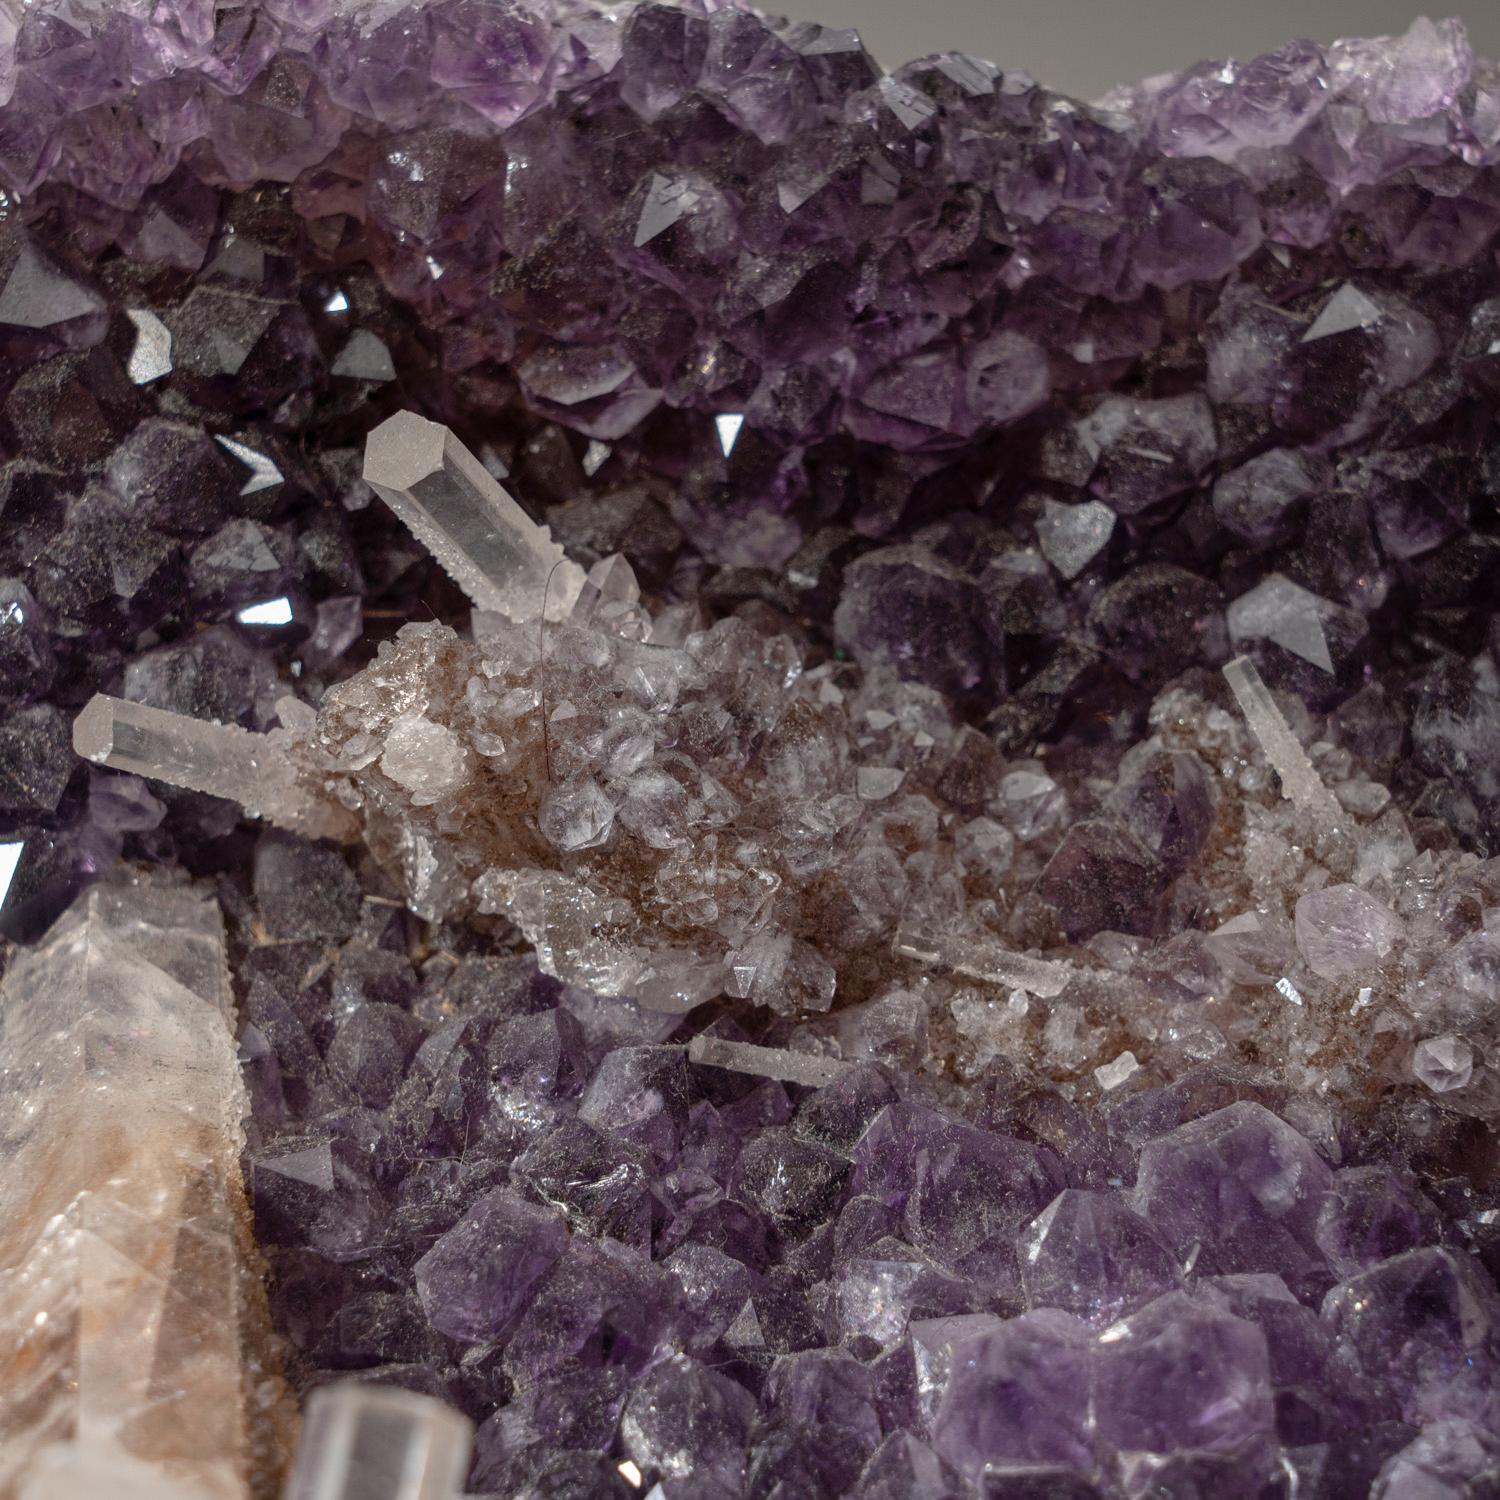 Uruguayan Genuine Amethyst Crystal Cluster with Calcite on Stand from Uruguay (16 lbs) For Sale